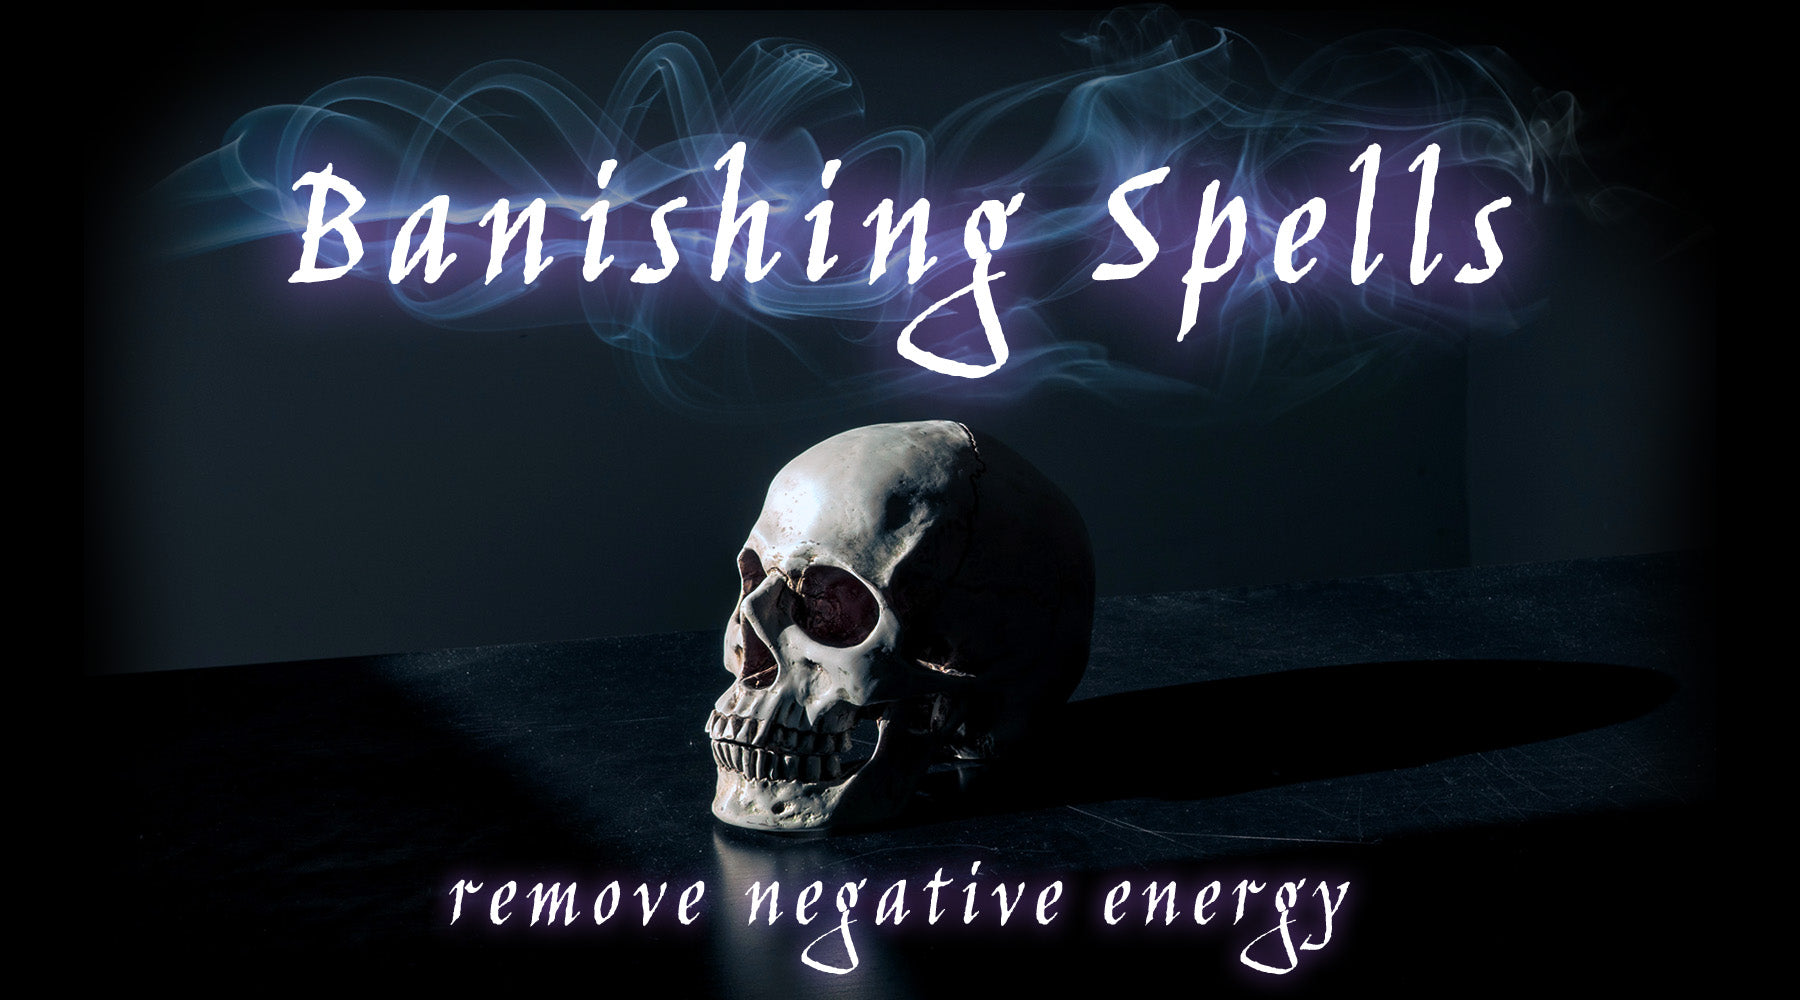 3 Banishing Spells for Mild, Moderate, and Extreme Negative Energy